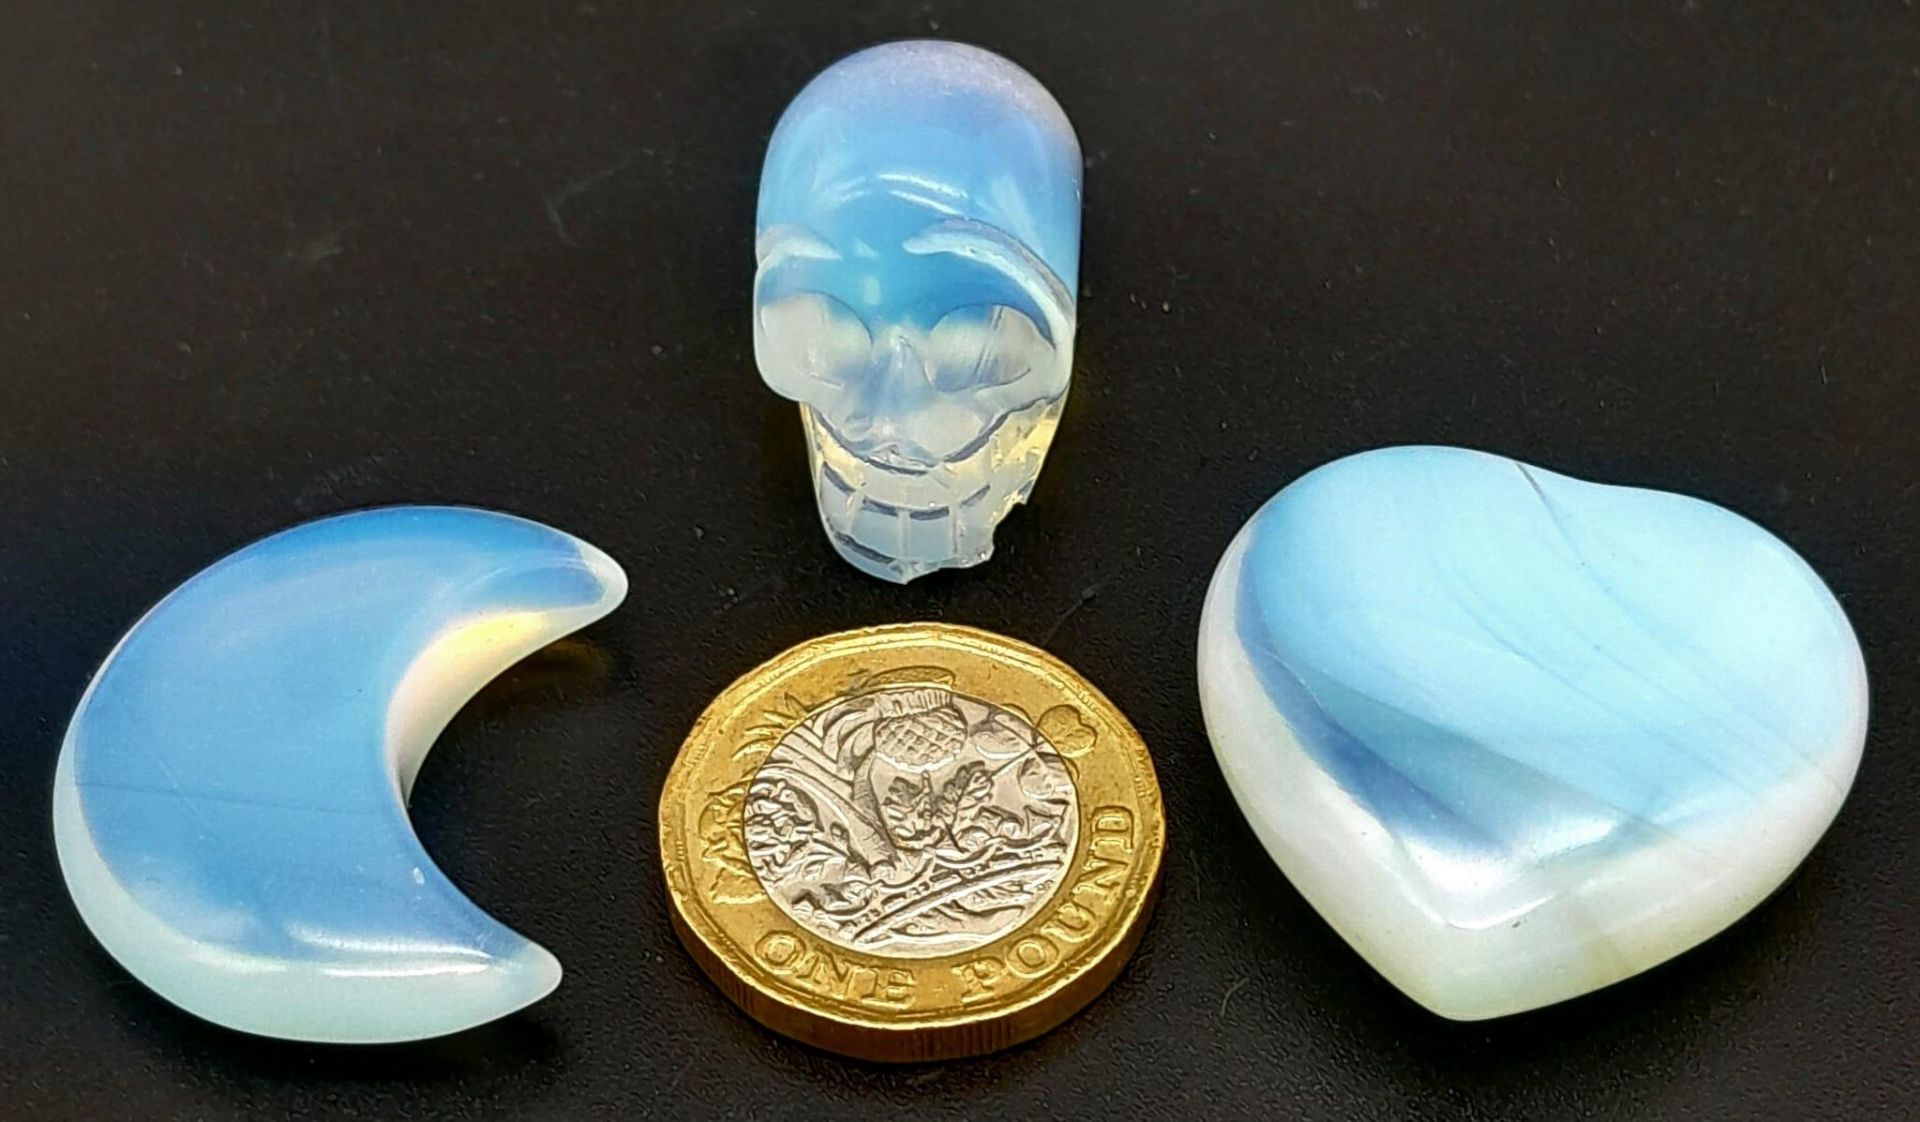 Parcel of 4 Opalite Figurines. Featuring a Dog, Skull, Heart & Moon. - Image 4 of 4